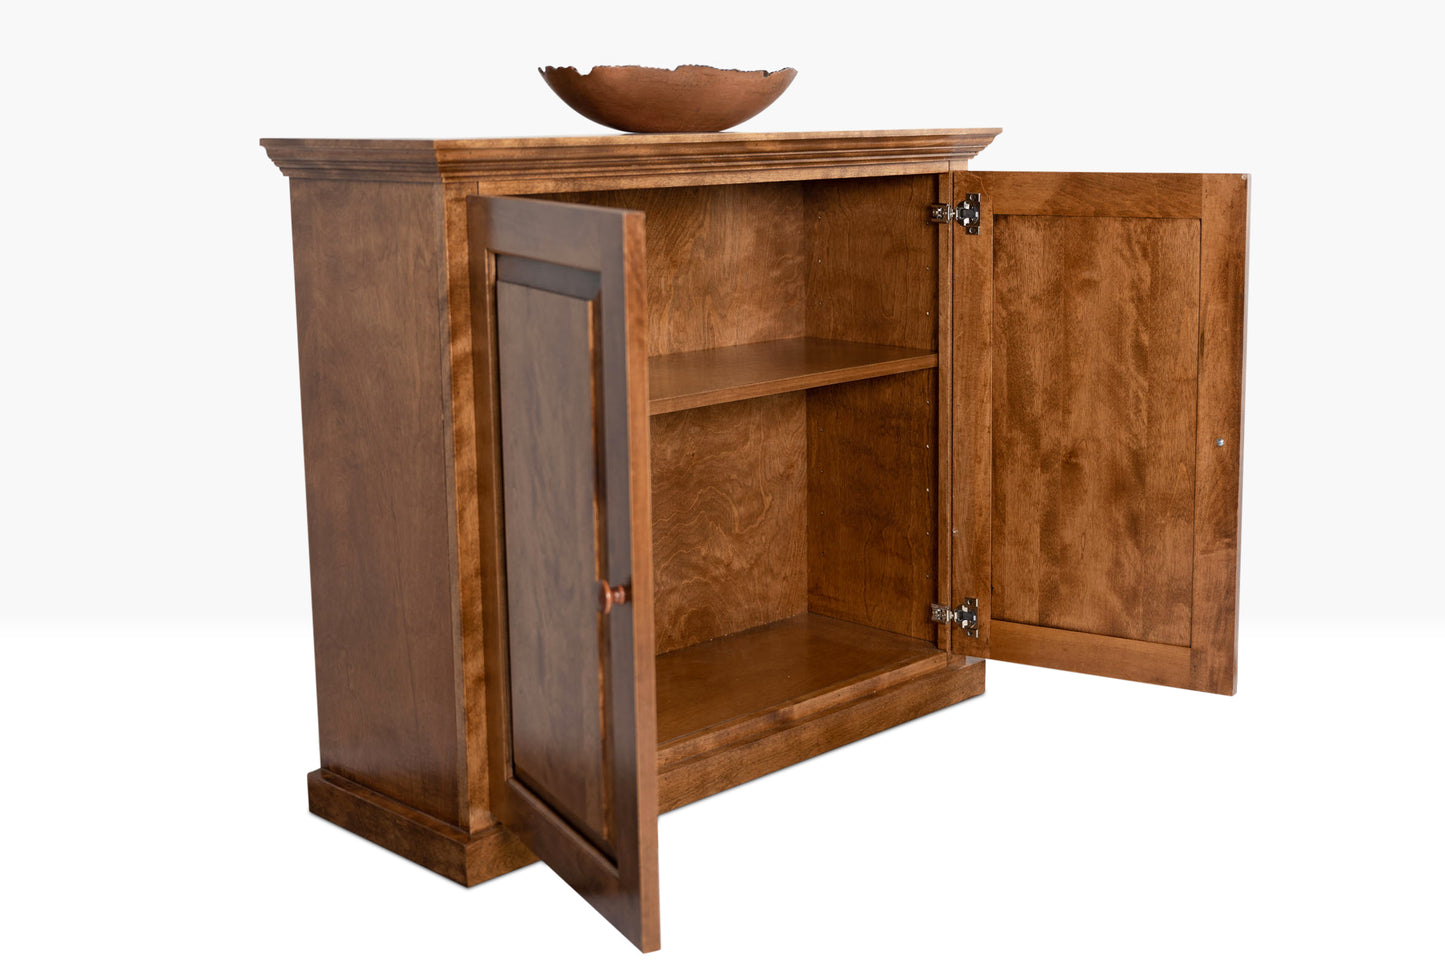 Berkshire Dover Cabinet built in birch with adjustable shelving, shown open in  country pine finish.